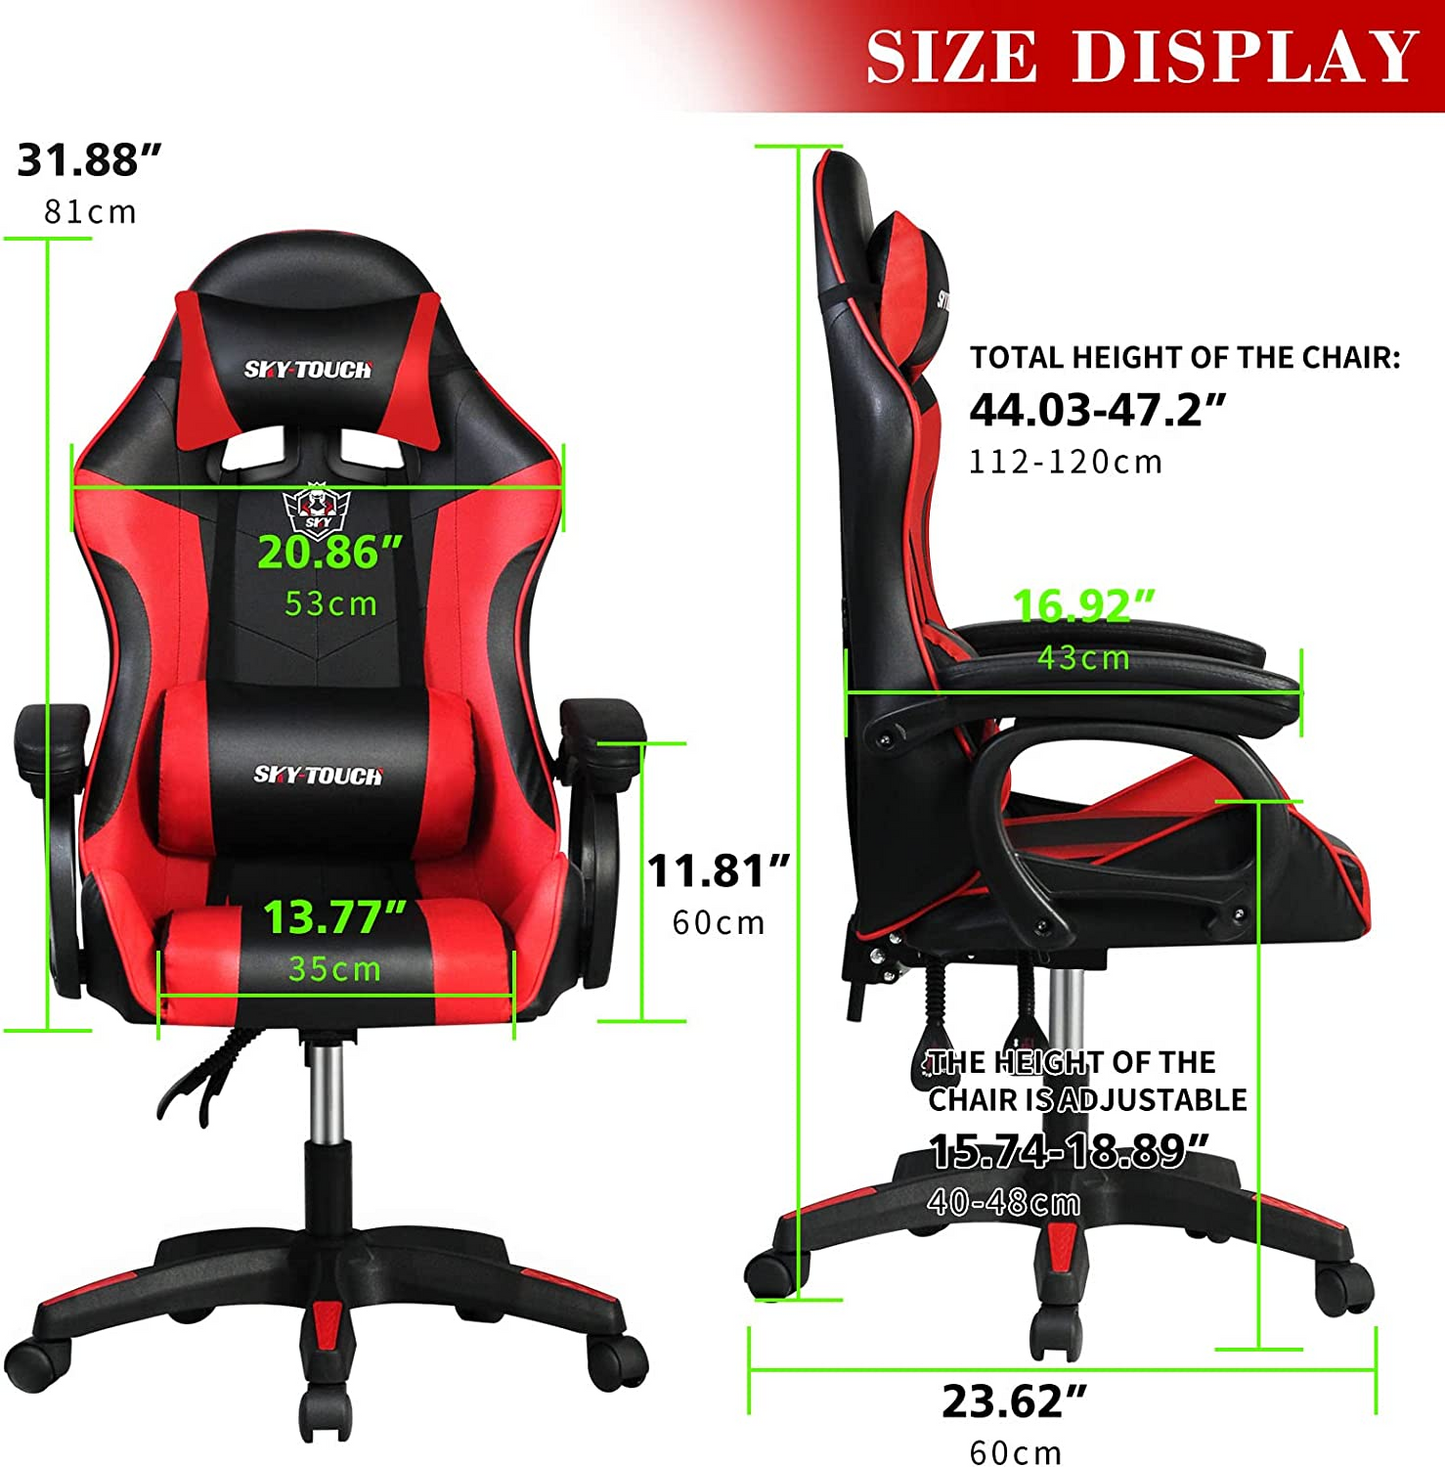 SKY-TOUCH Gaming Chair，Adjustable Computer Chair Pc Office Pu Leather High Back, Ergonomic design Lumbar Support,Comfortable Armrest Headrest